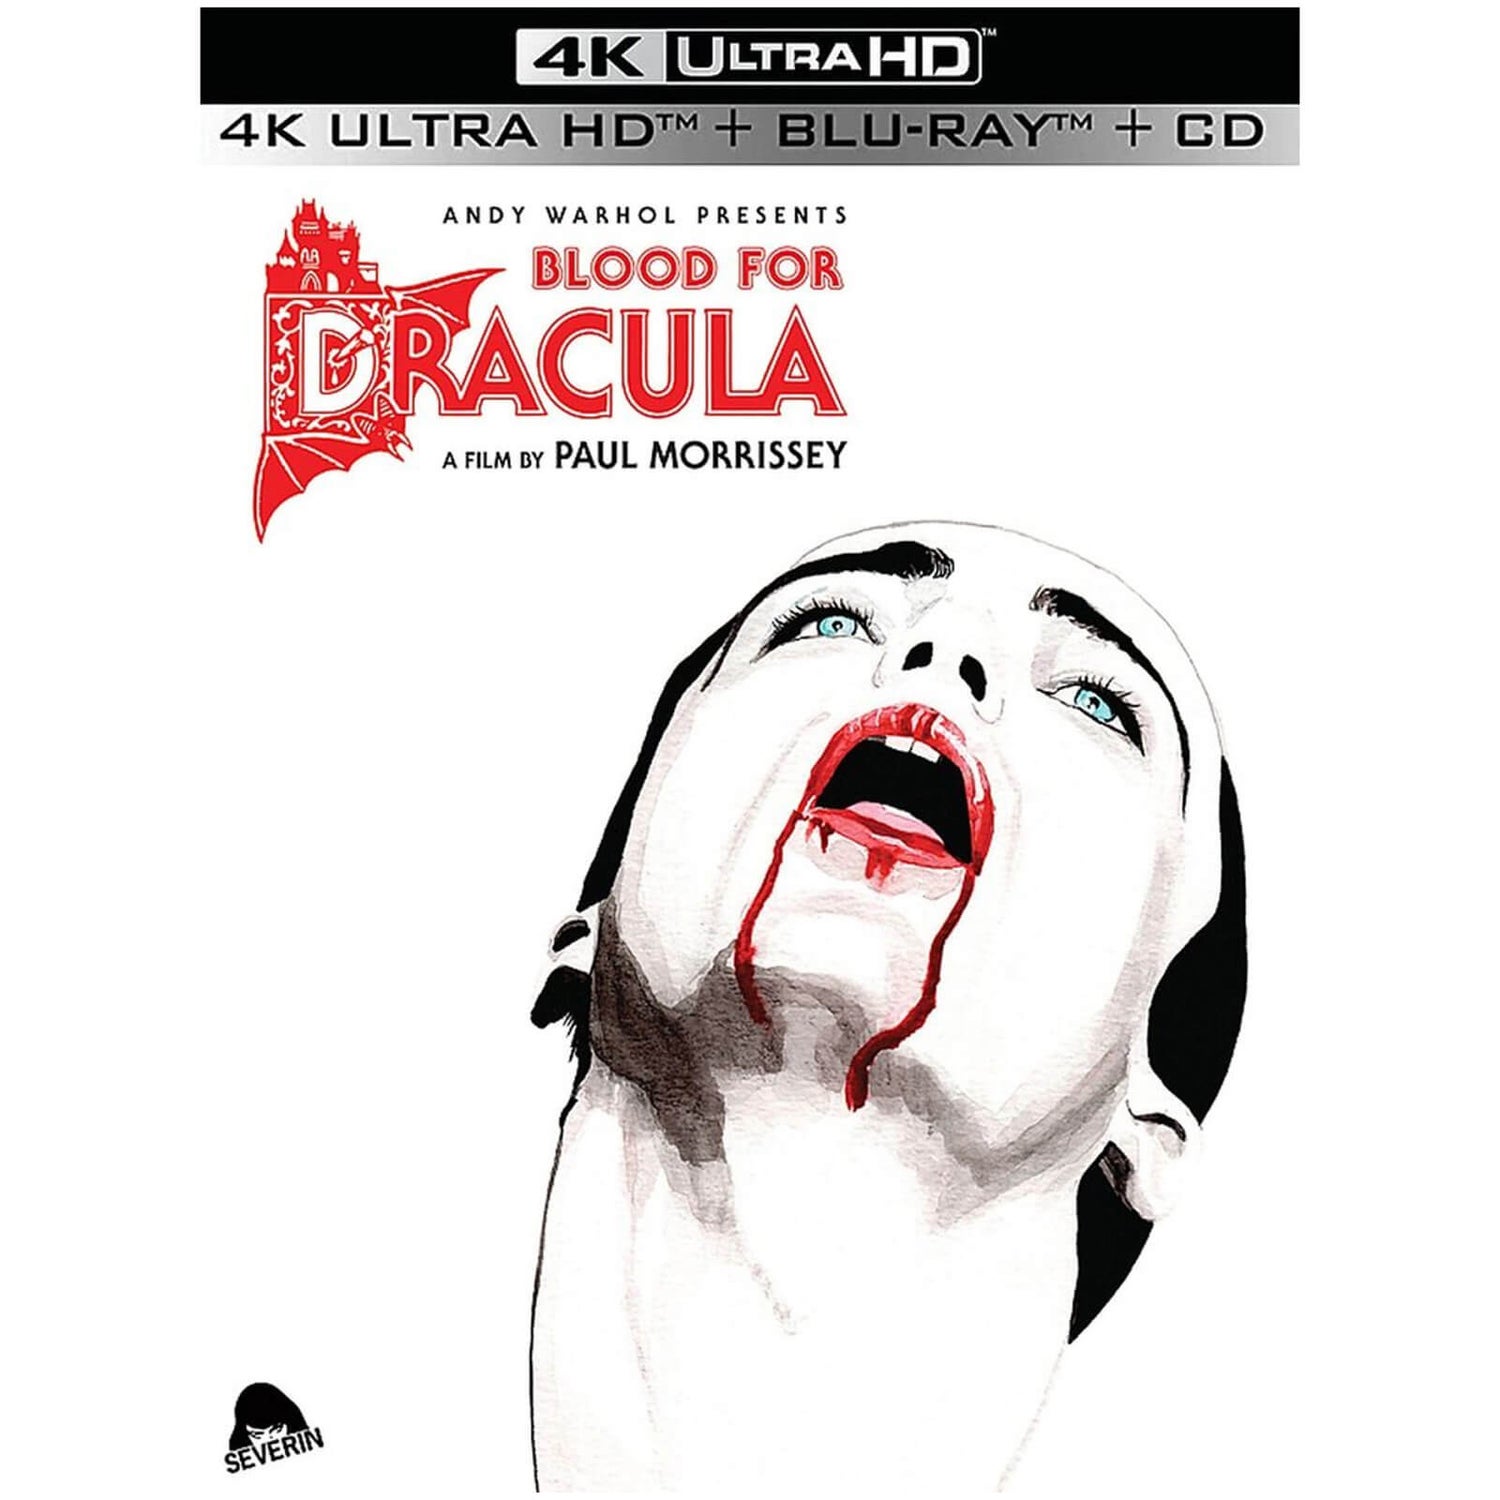 Blood for Dracula - Limited Edition 4K Ultra HD (Includes Blu-ray & CD) (US Import)